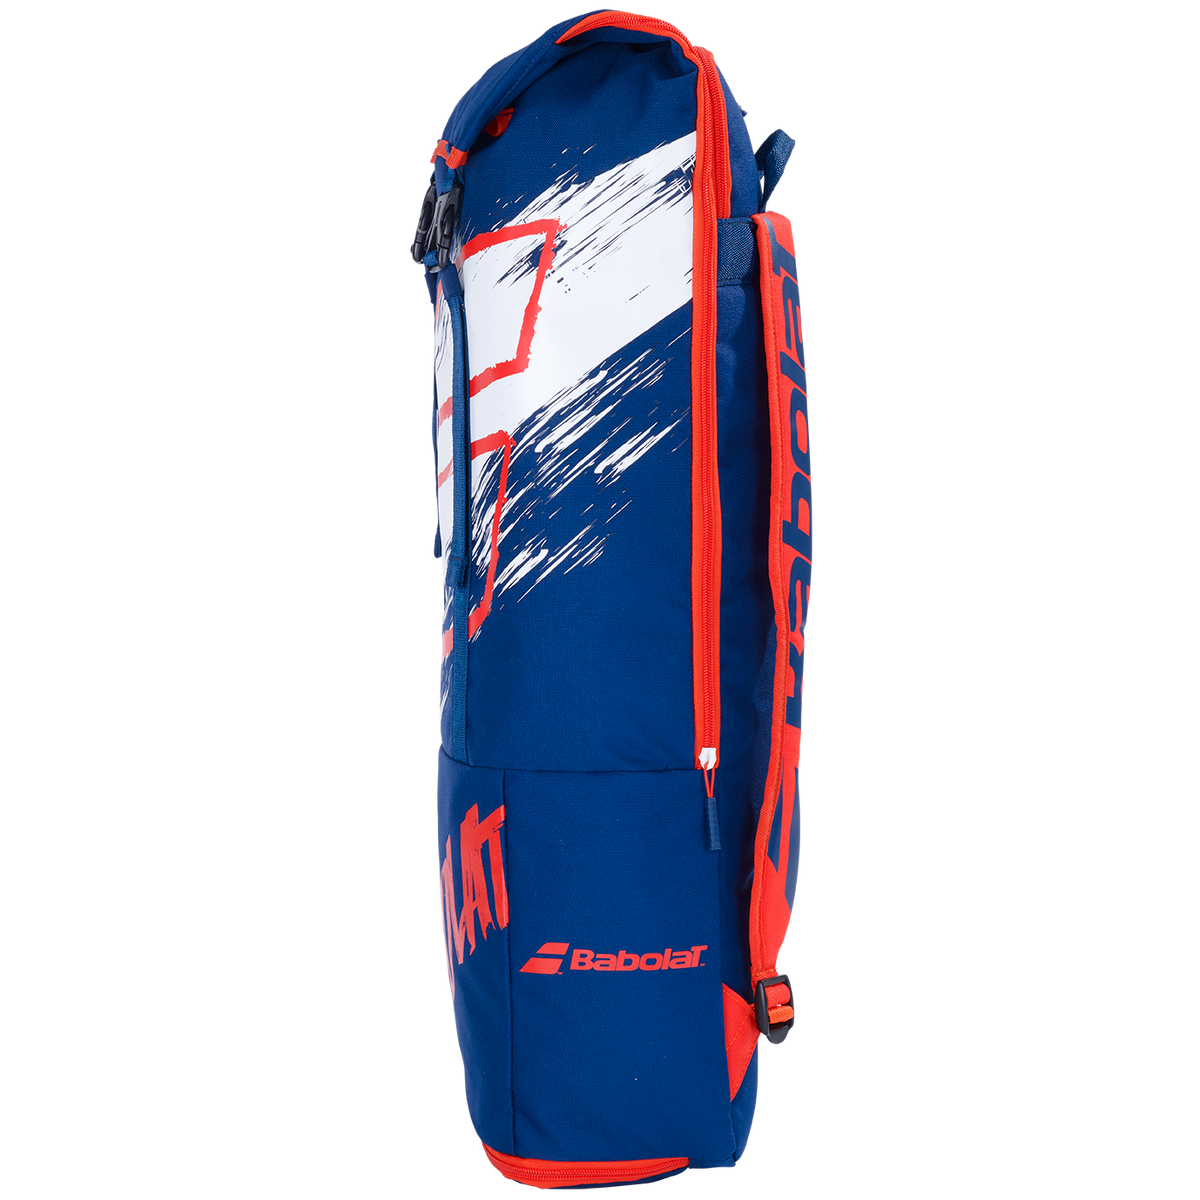 Babolat Backpack 2 757014 Blue/White/Red